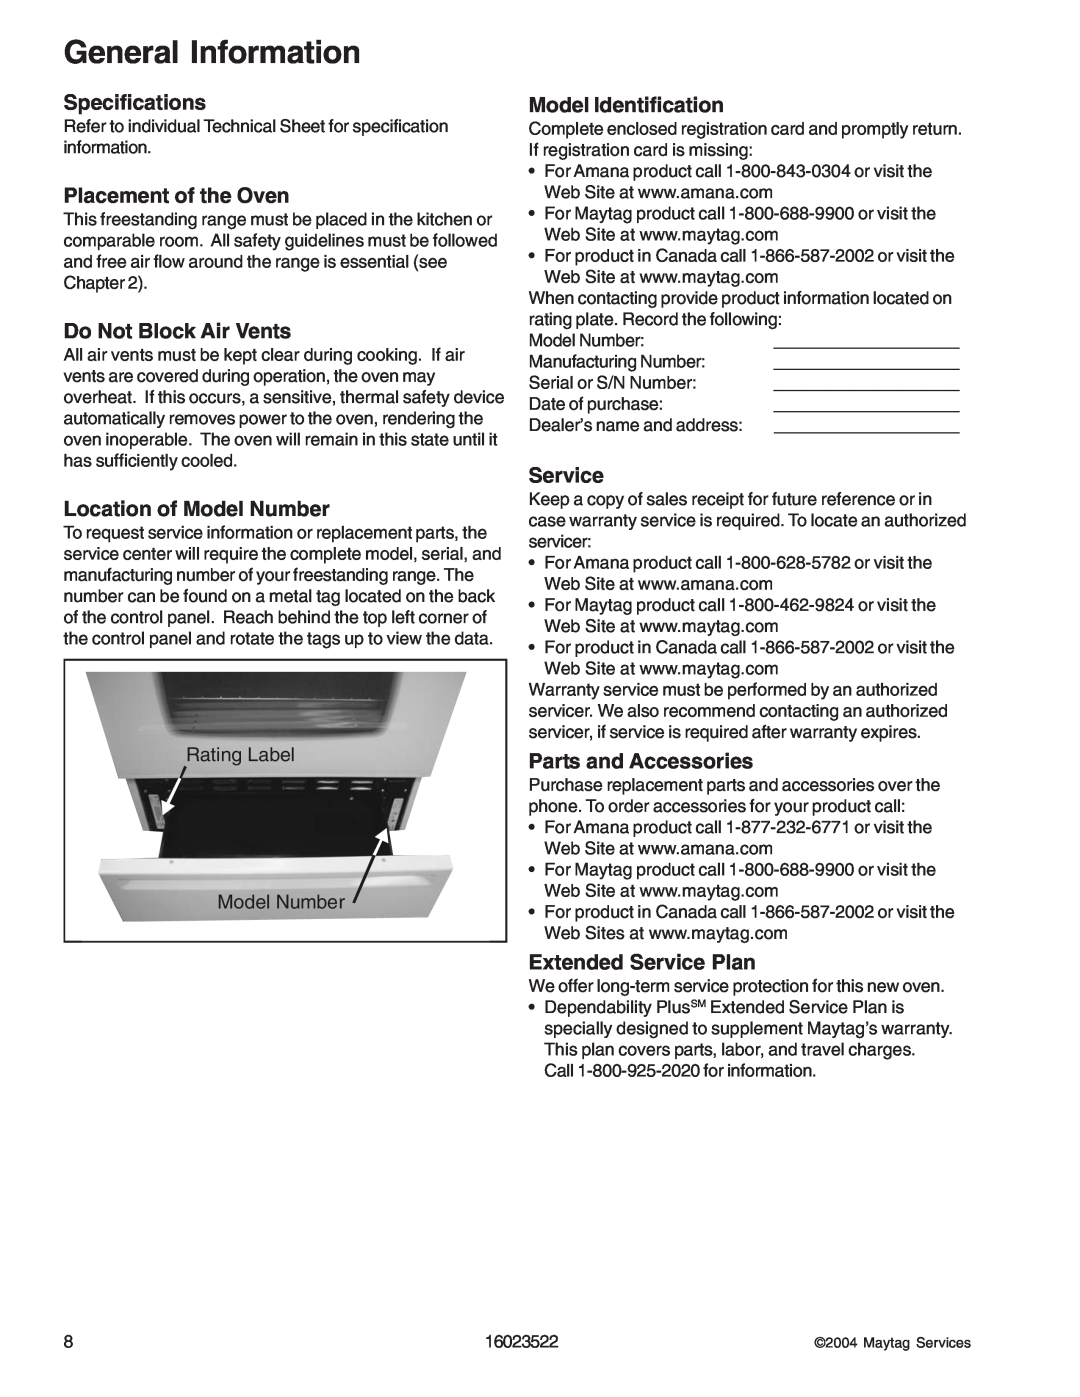 Maytag CPR1100ADQ/W manual Specifications, Placement of the Oven, Do Not Block Air Vents, Location of Model Number, Service 